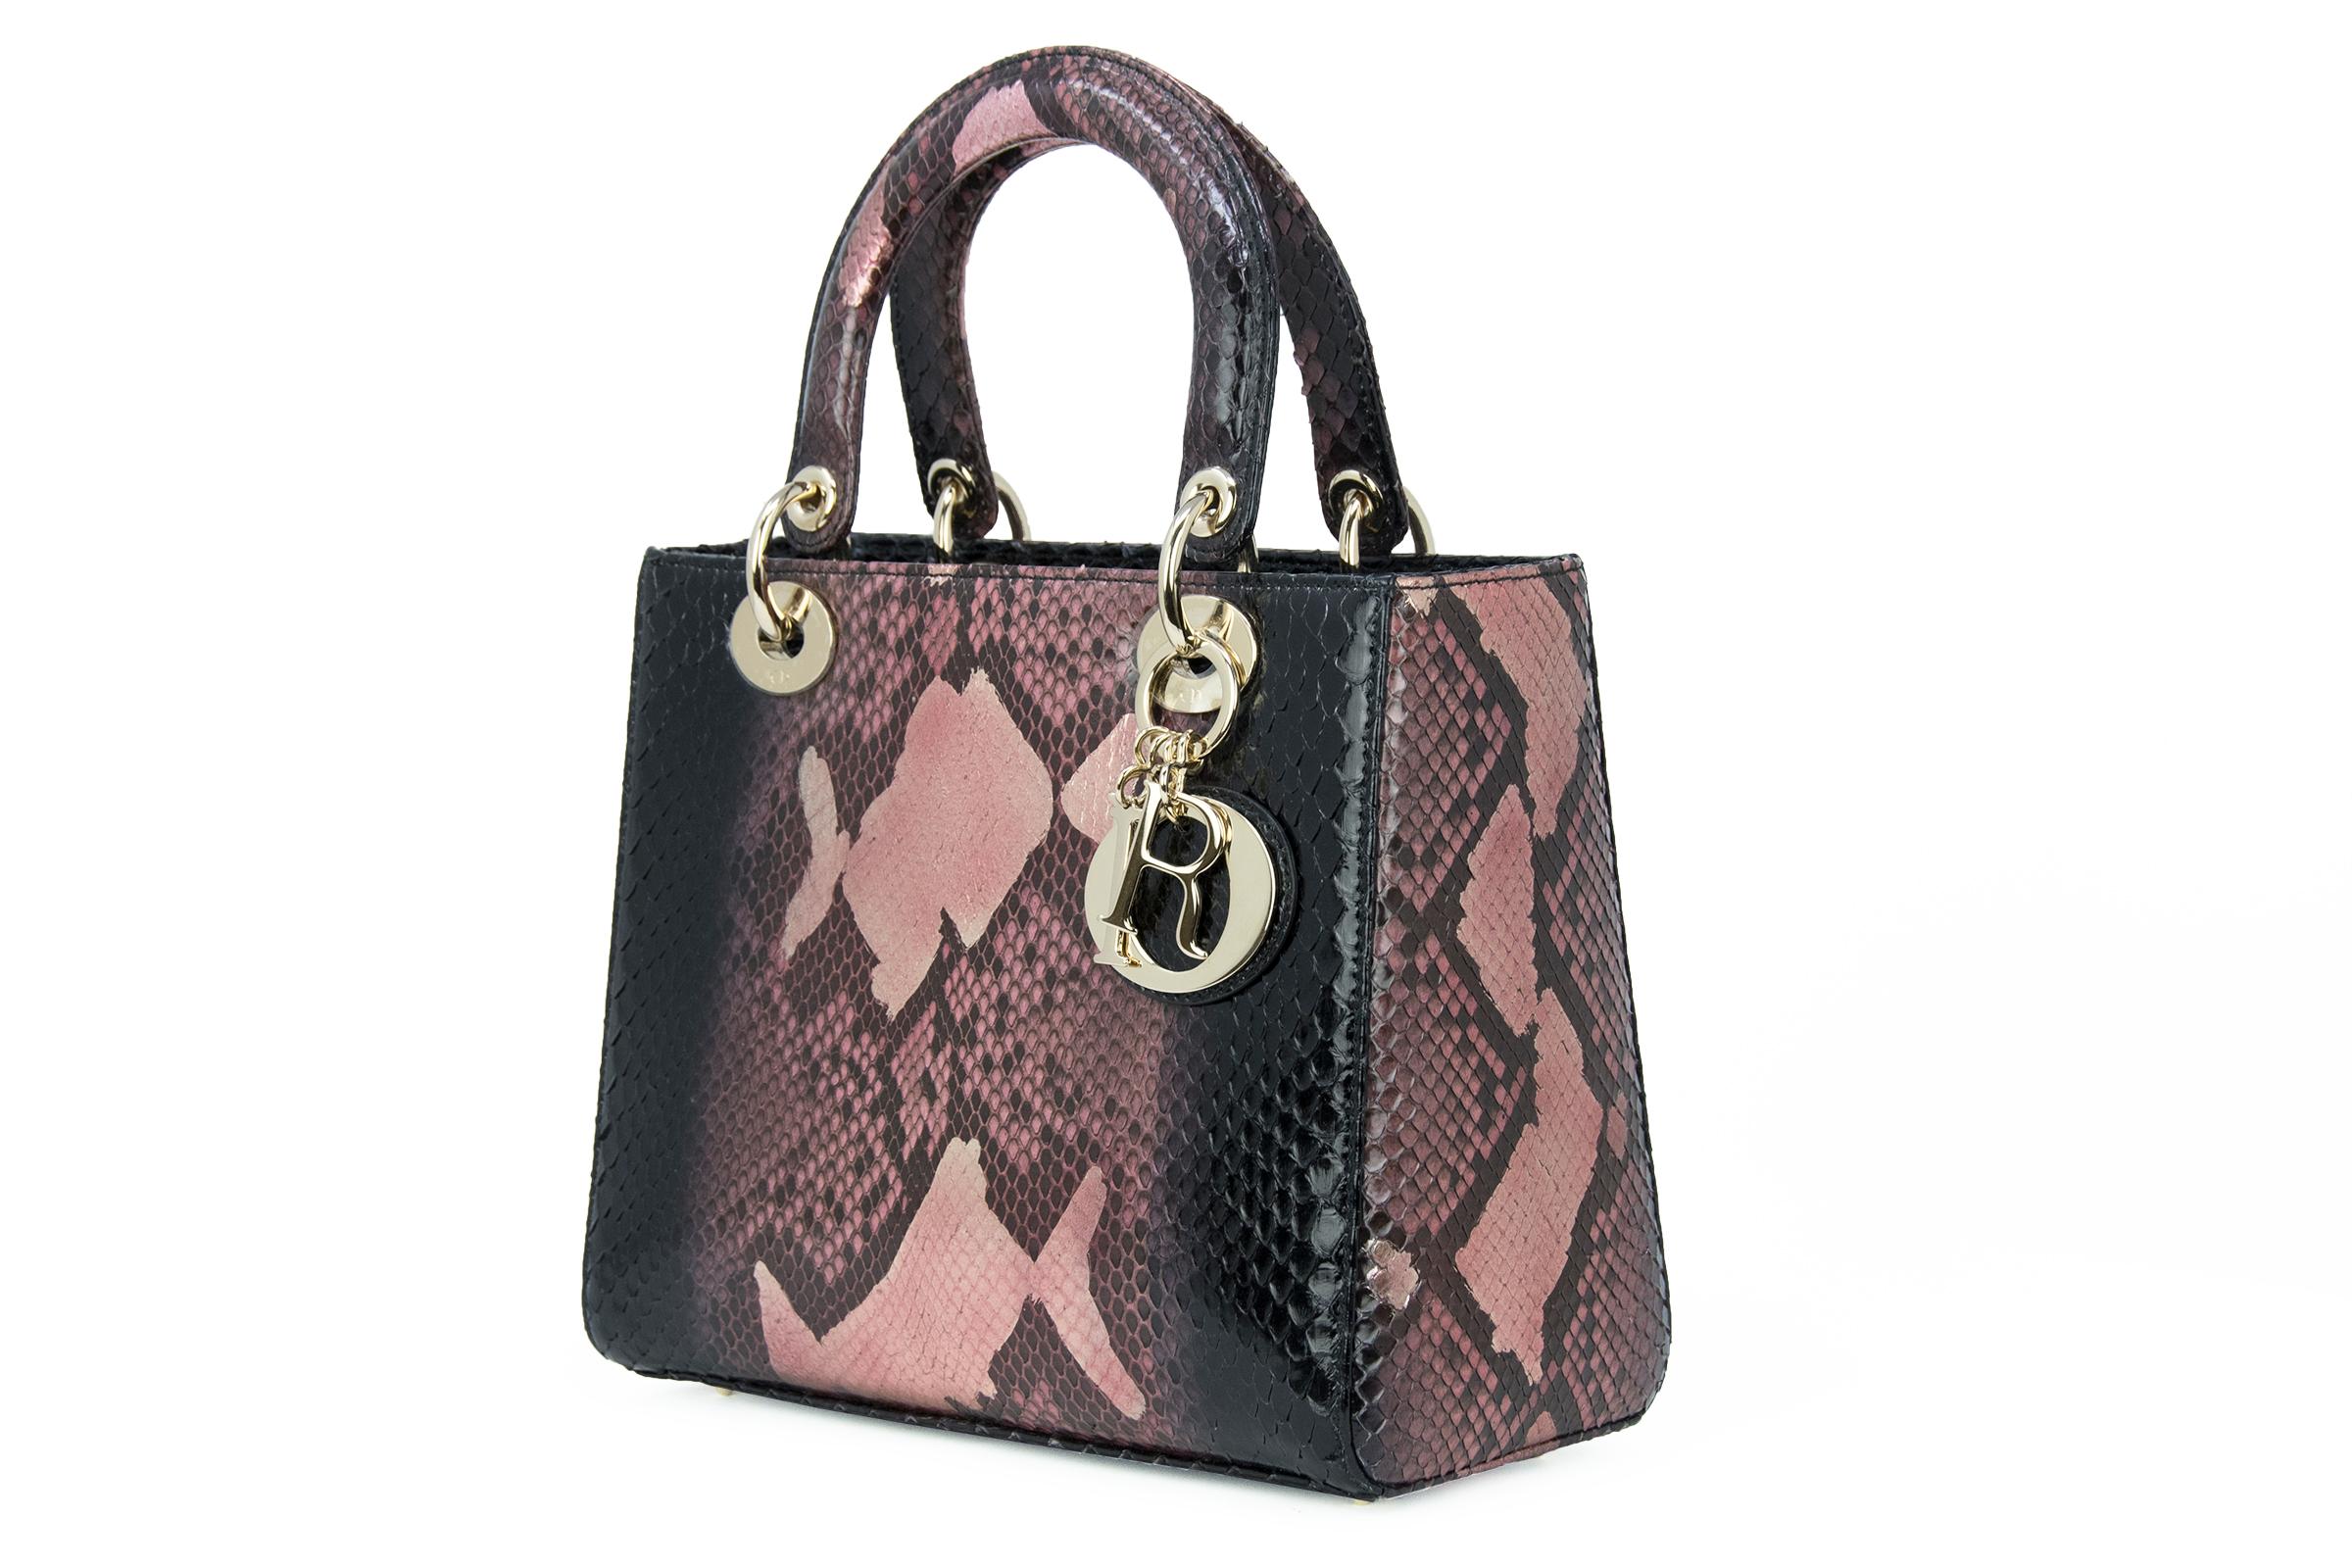 Incredible metallic python skin in hues of black and pink with gold hardware and top handles.  Features Dior letter charms that hang off the hardware on the handles. Rare to find this Lady Dior in a gorgeous snakeskin. 

Condition: In brand new